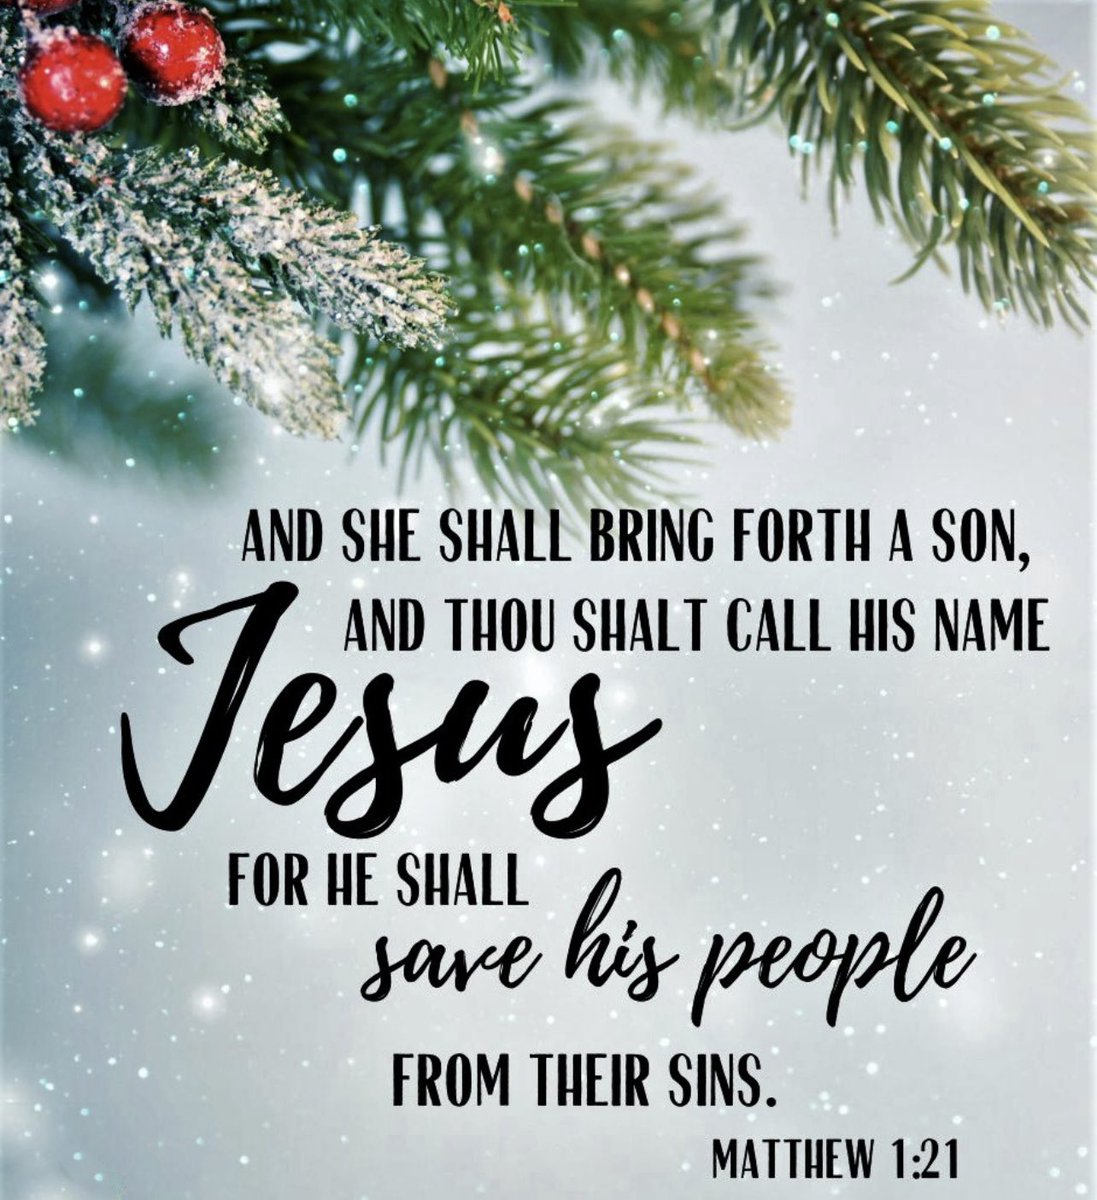 🔔Good Morning Prayer Warriors🔔
🎄A person’s name can be fascinating! Why was it chosen for you? Does it represent the family heritage? Mary and Joseph were given very specific instructions to name the Child Mary gave birth to JESUS~Yahweh saves! Our LORD saves us from our sins…